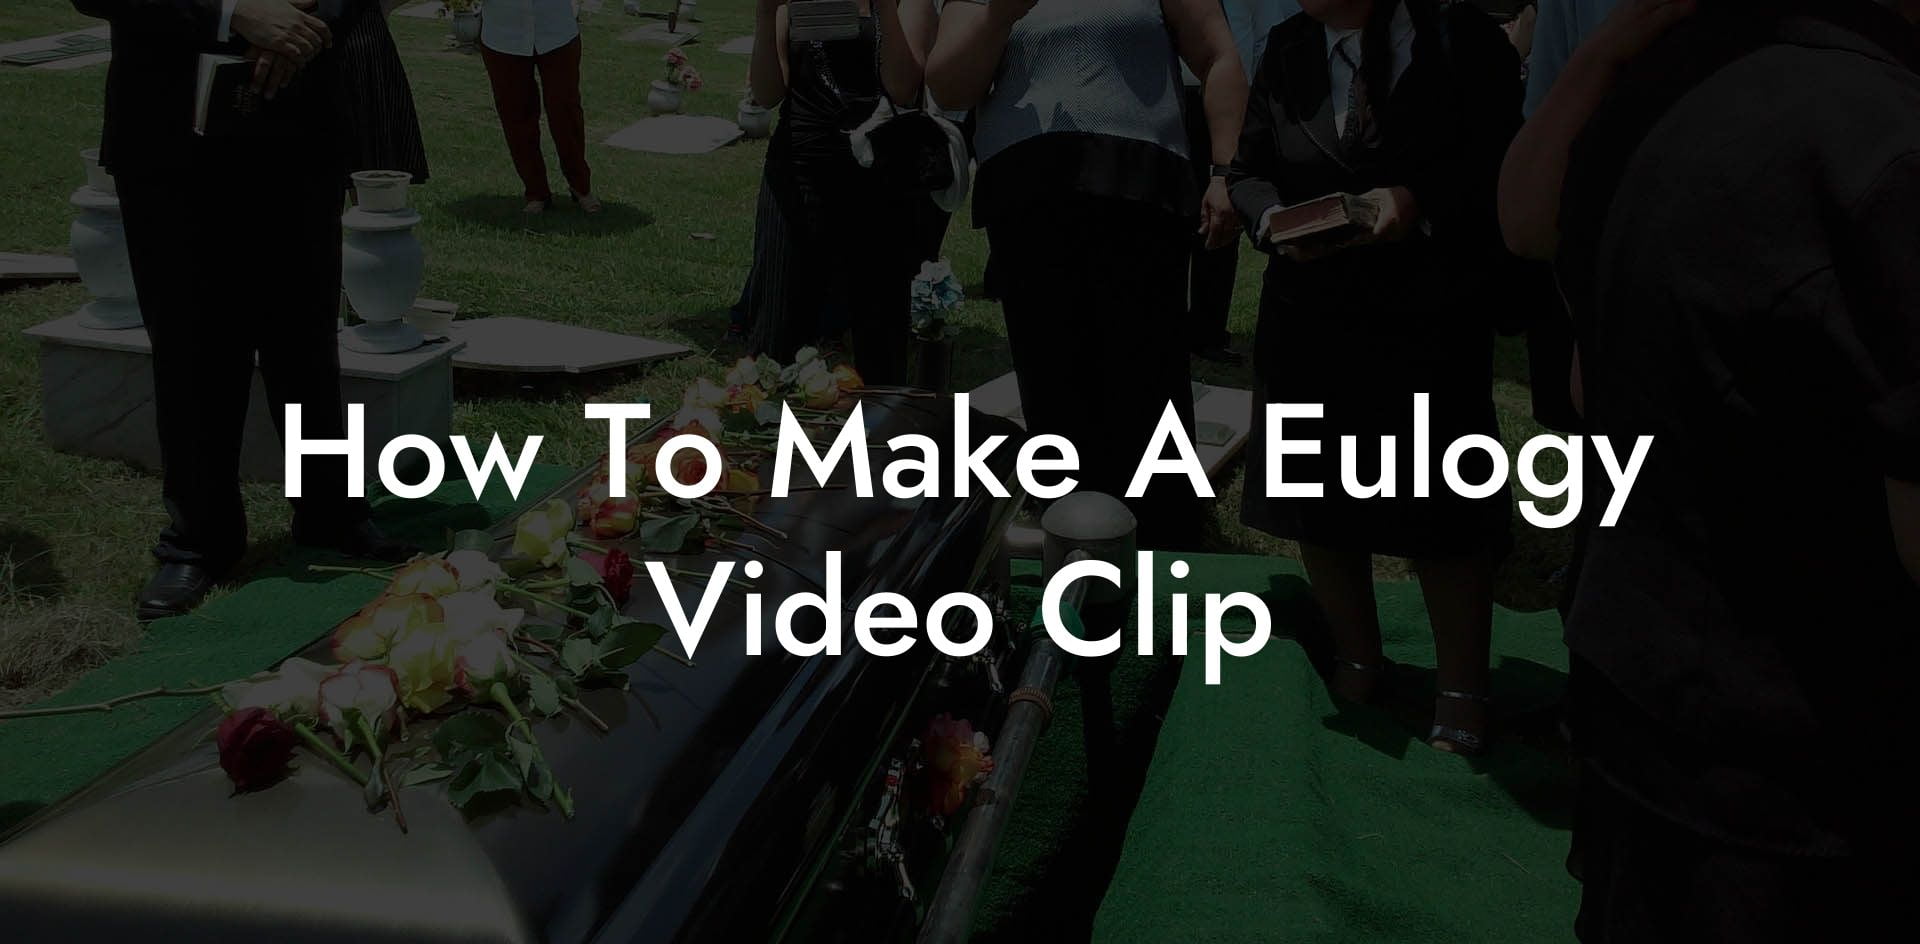 How To Make A Eulogy Video Clip